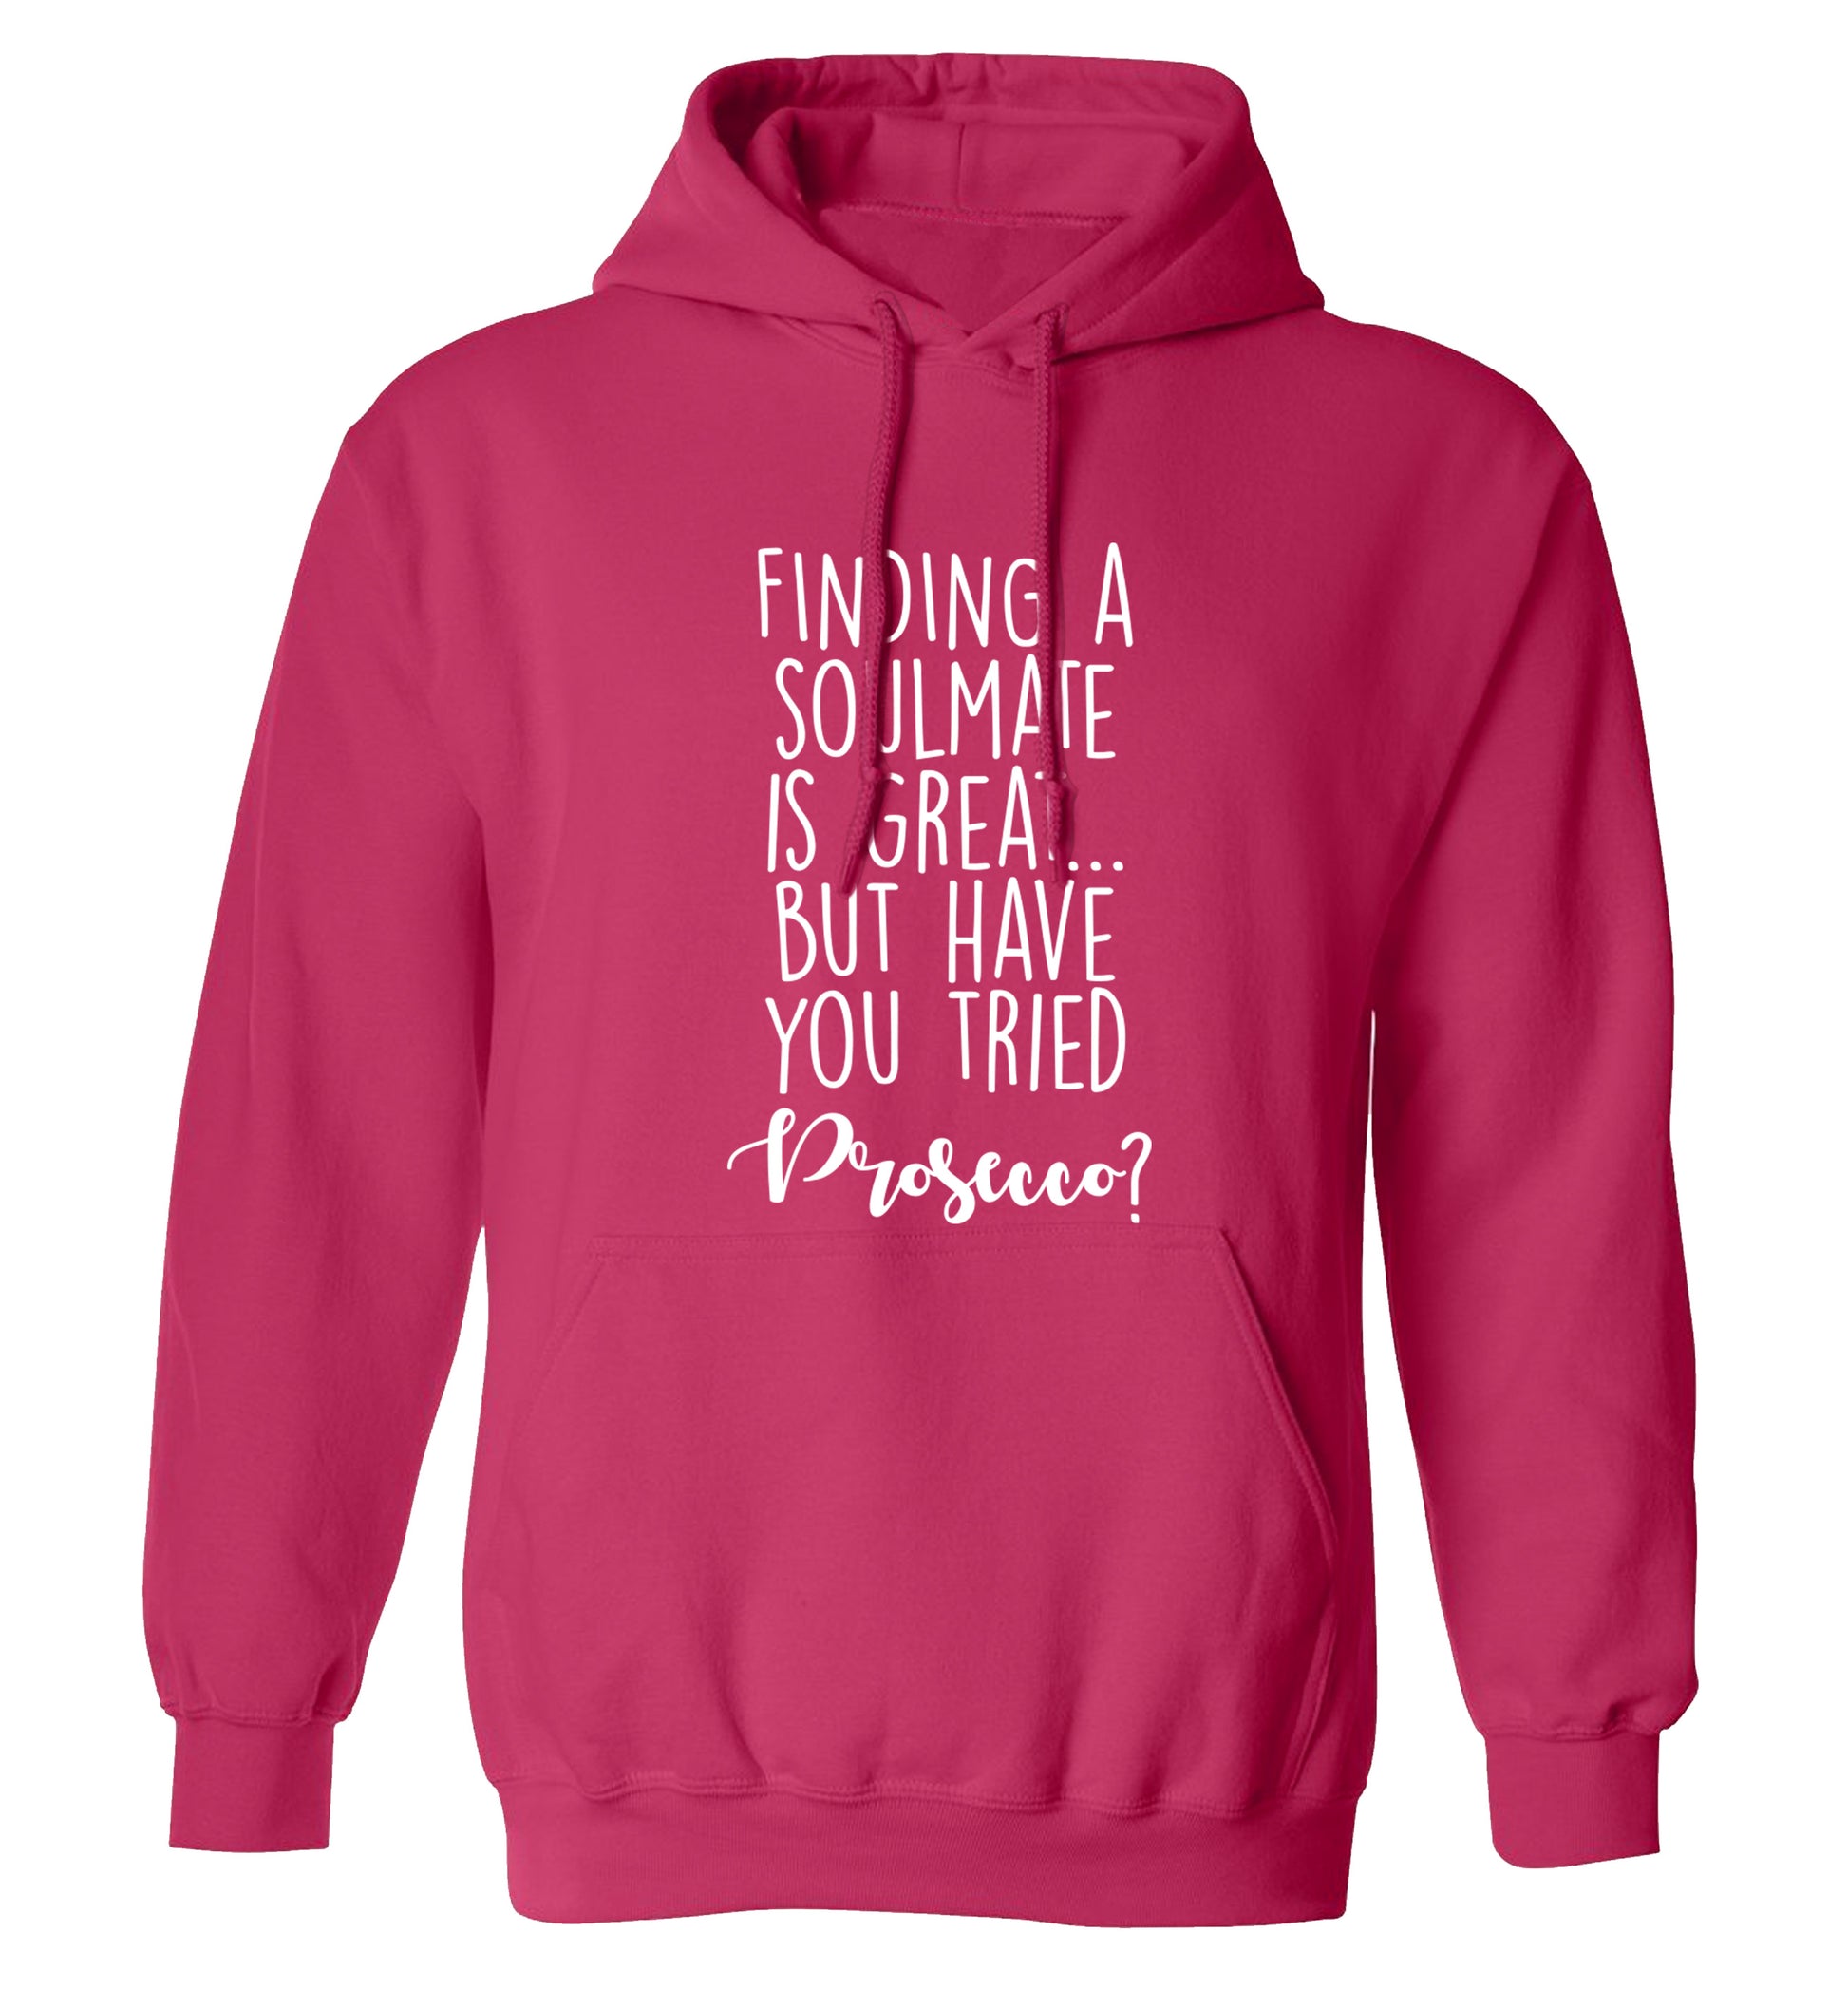 Finding a soulmate is great but have you tried prosecco? adults unisex pink hoodie 2XL